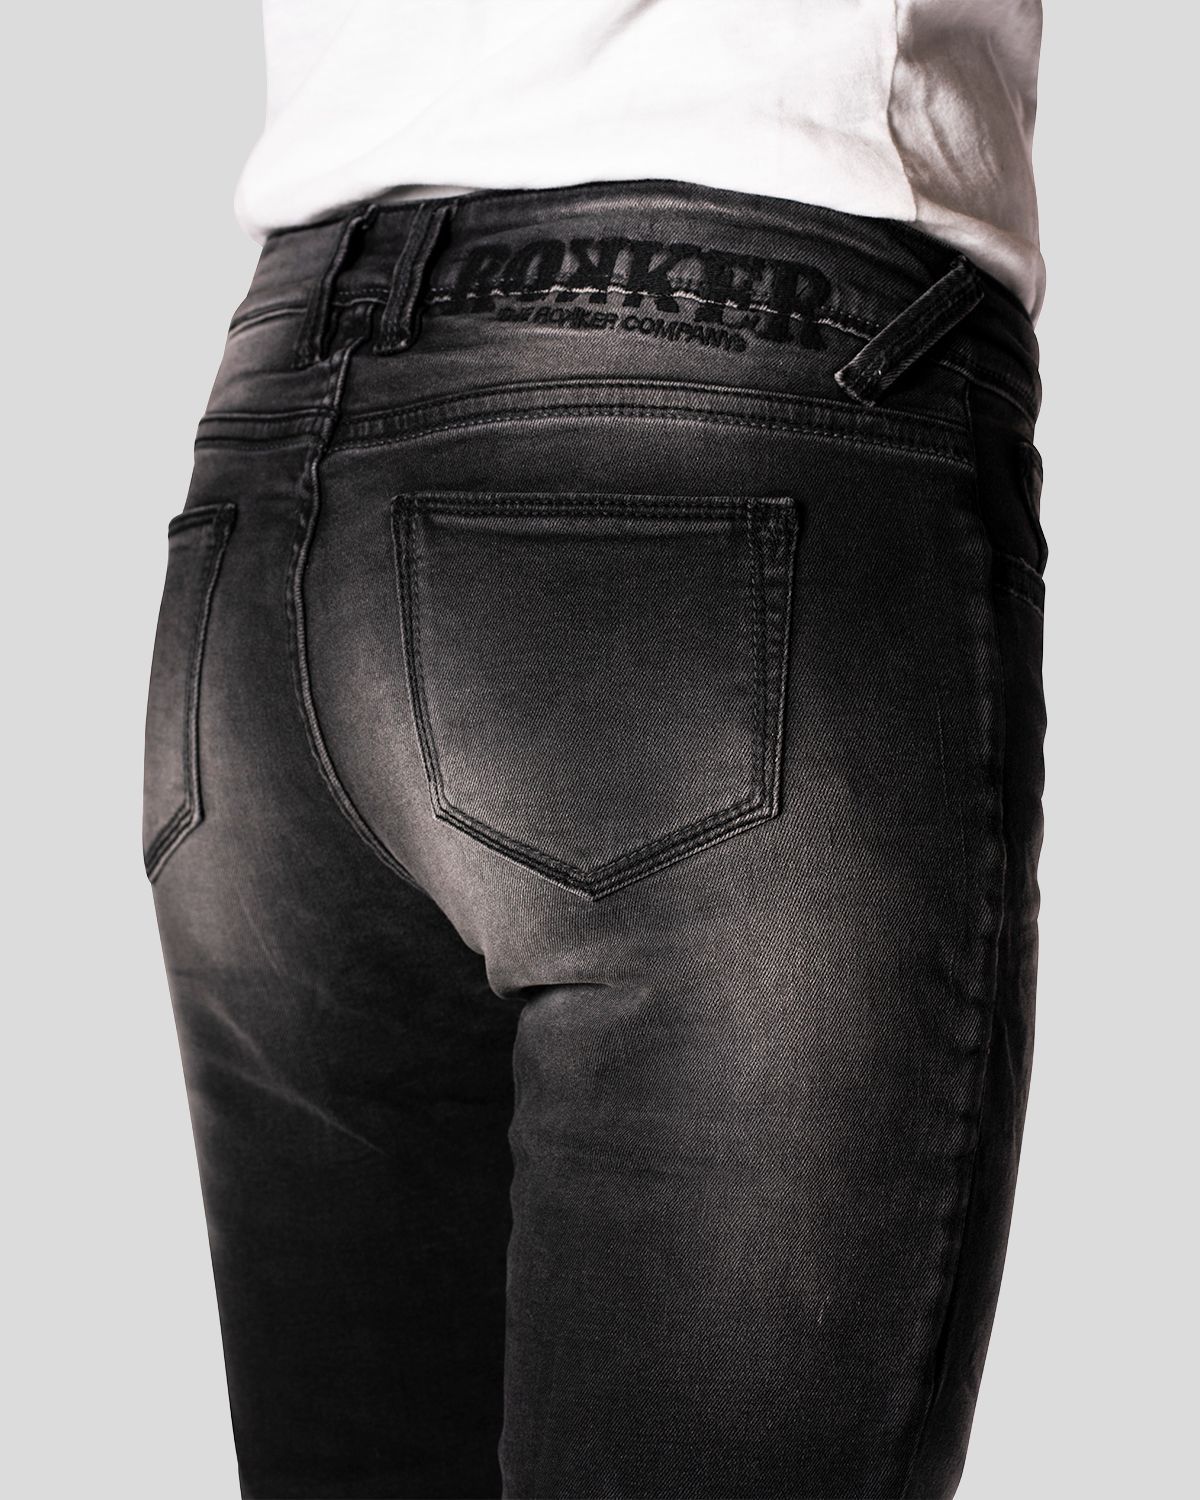 The Donna Black Jeans The Rokker Company 